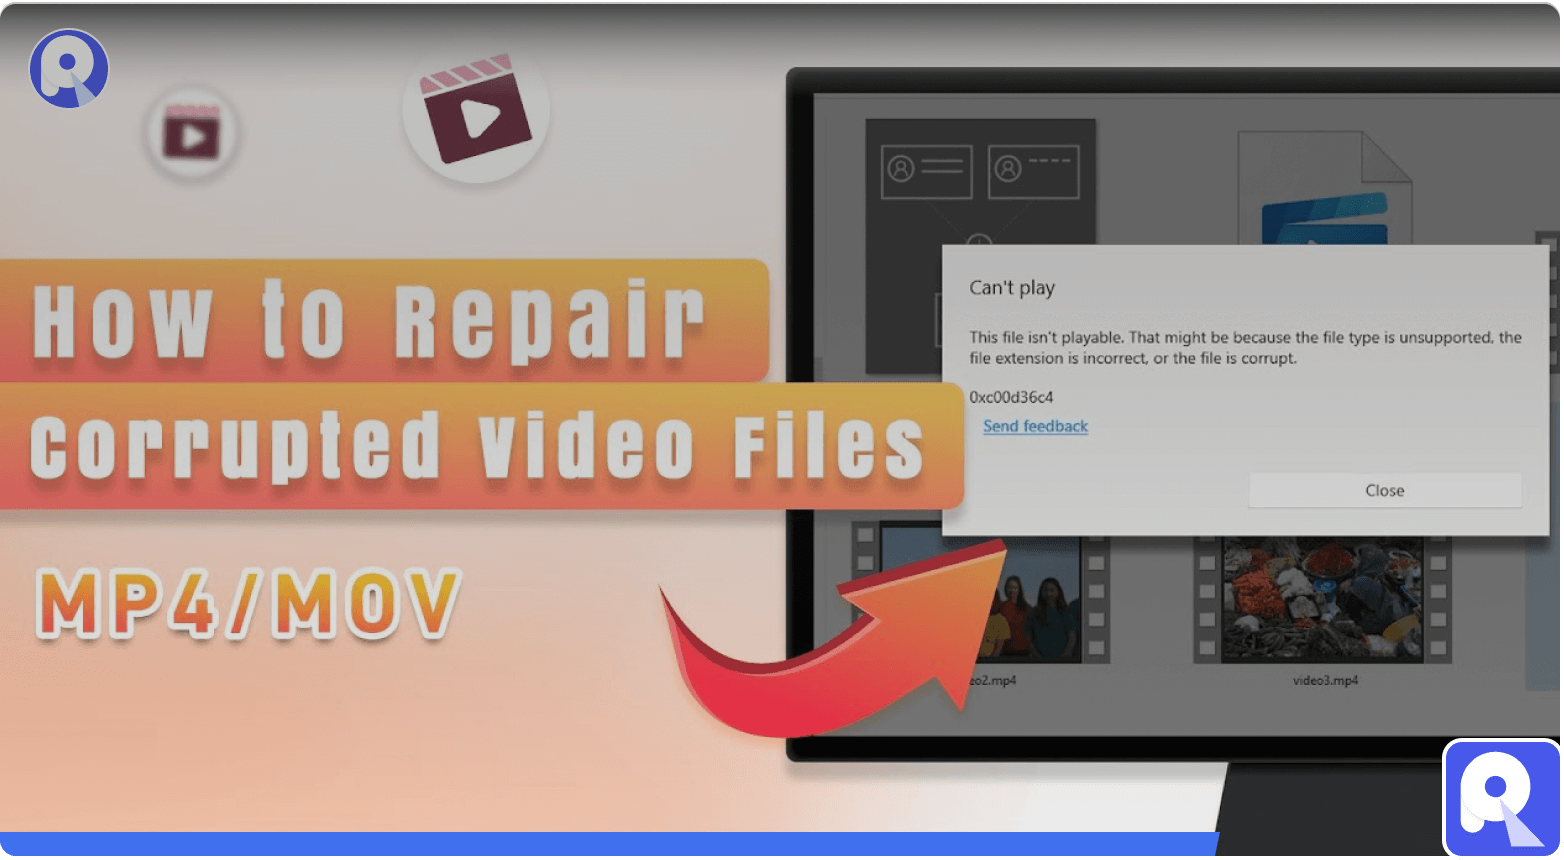 video guide about recovering deleted files from recycle bin